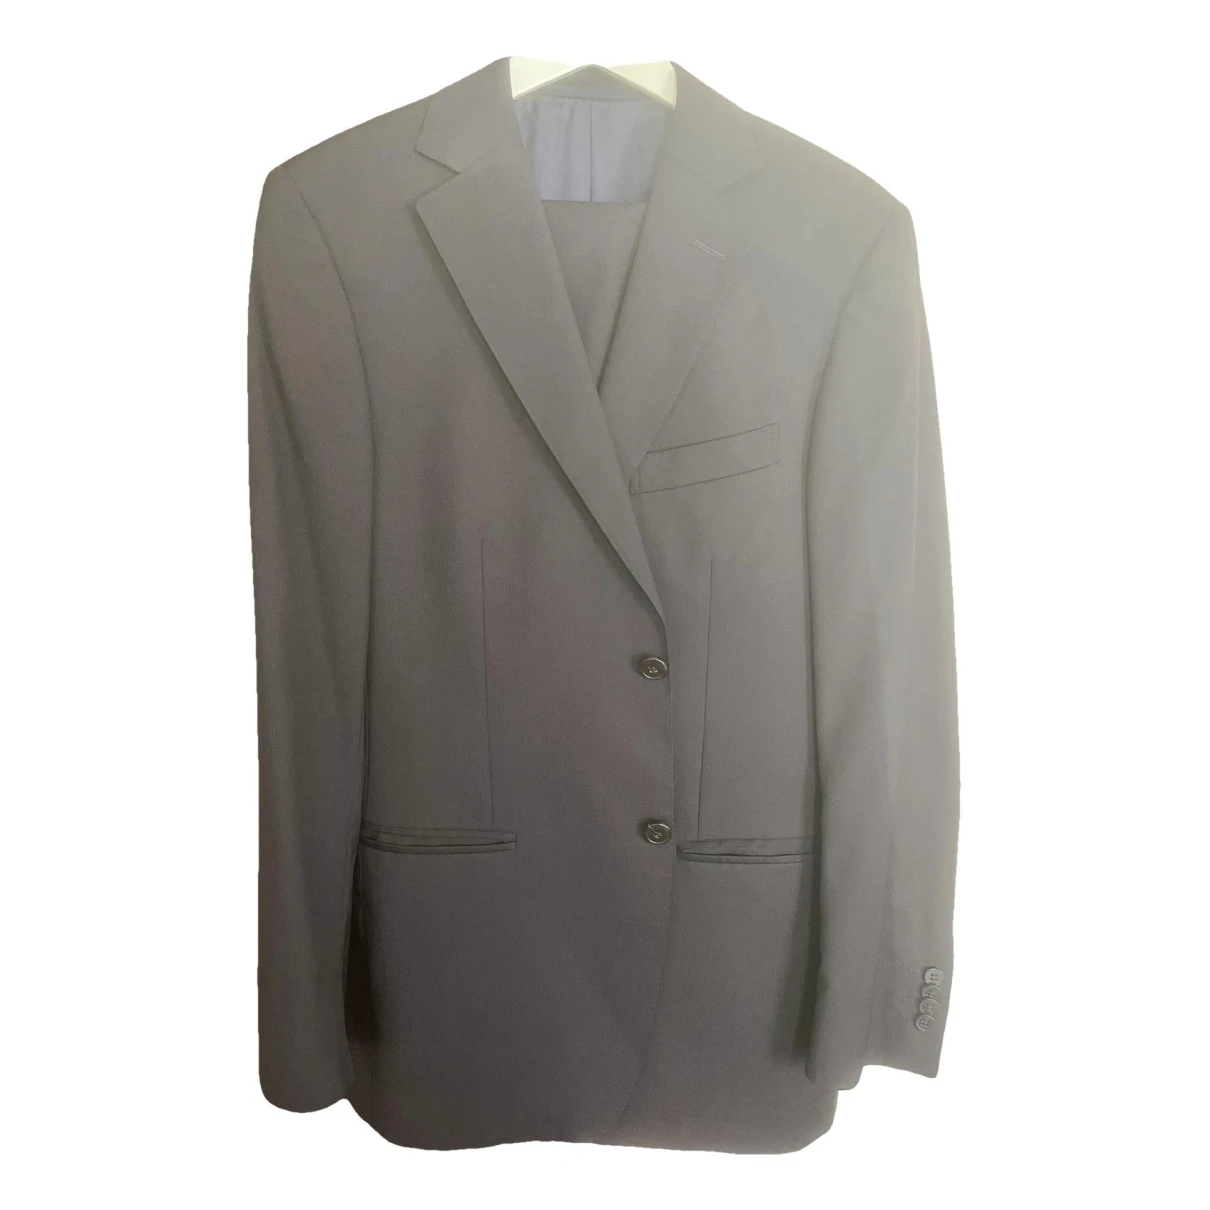 clothing Z Zegna suits for Male Wool 48 FR. Used condition